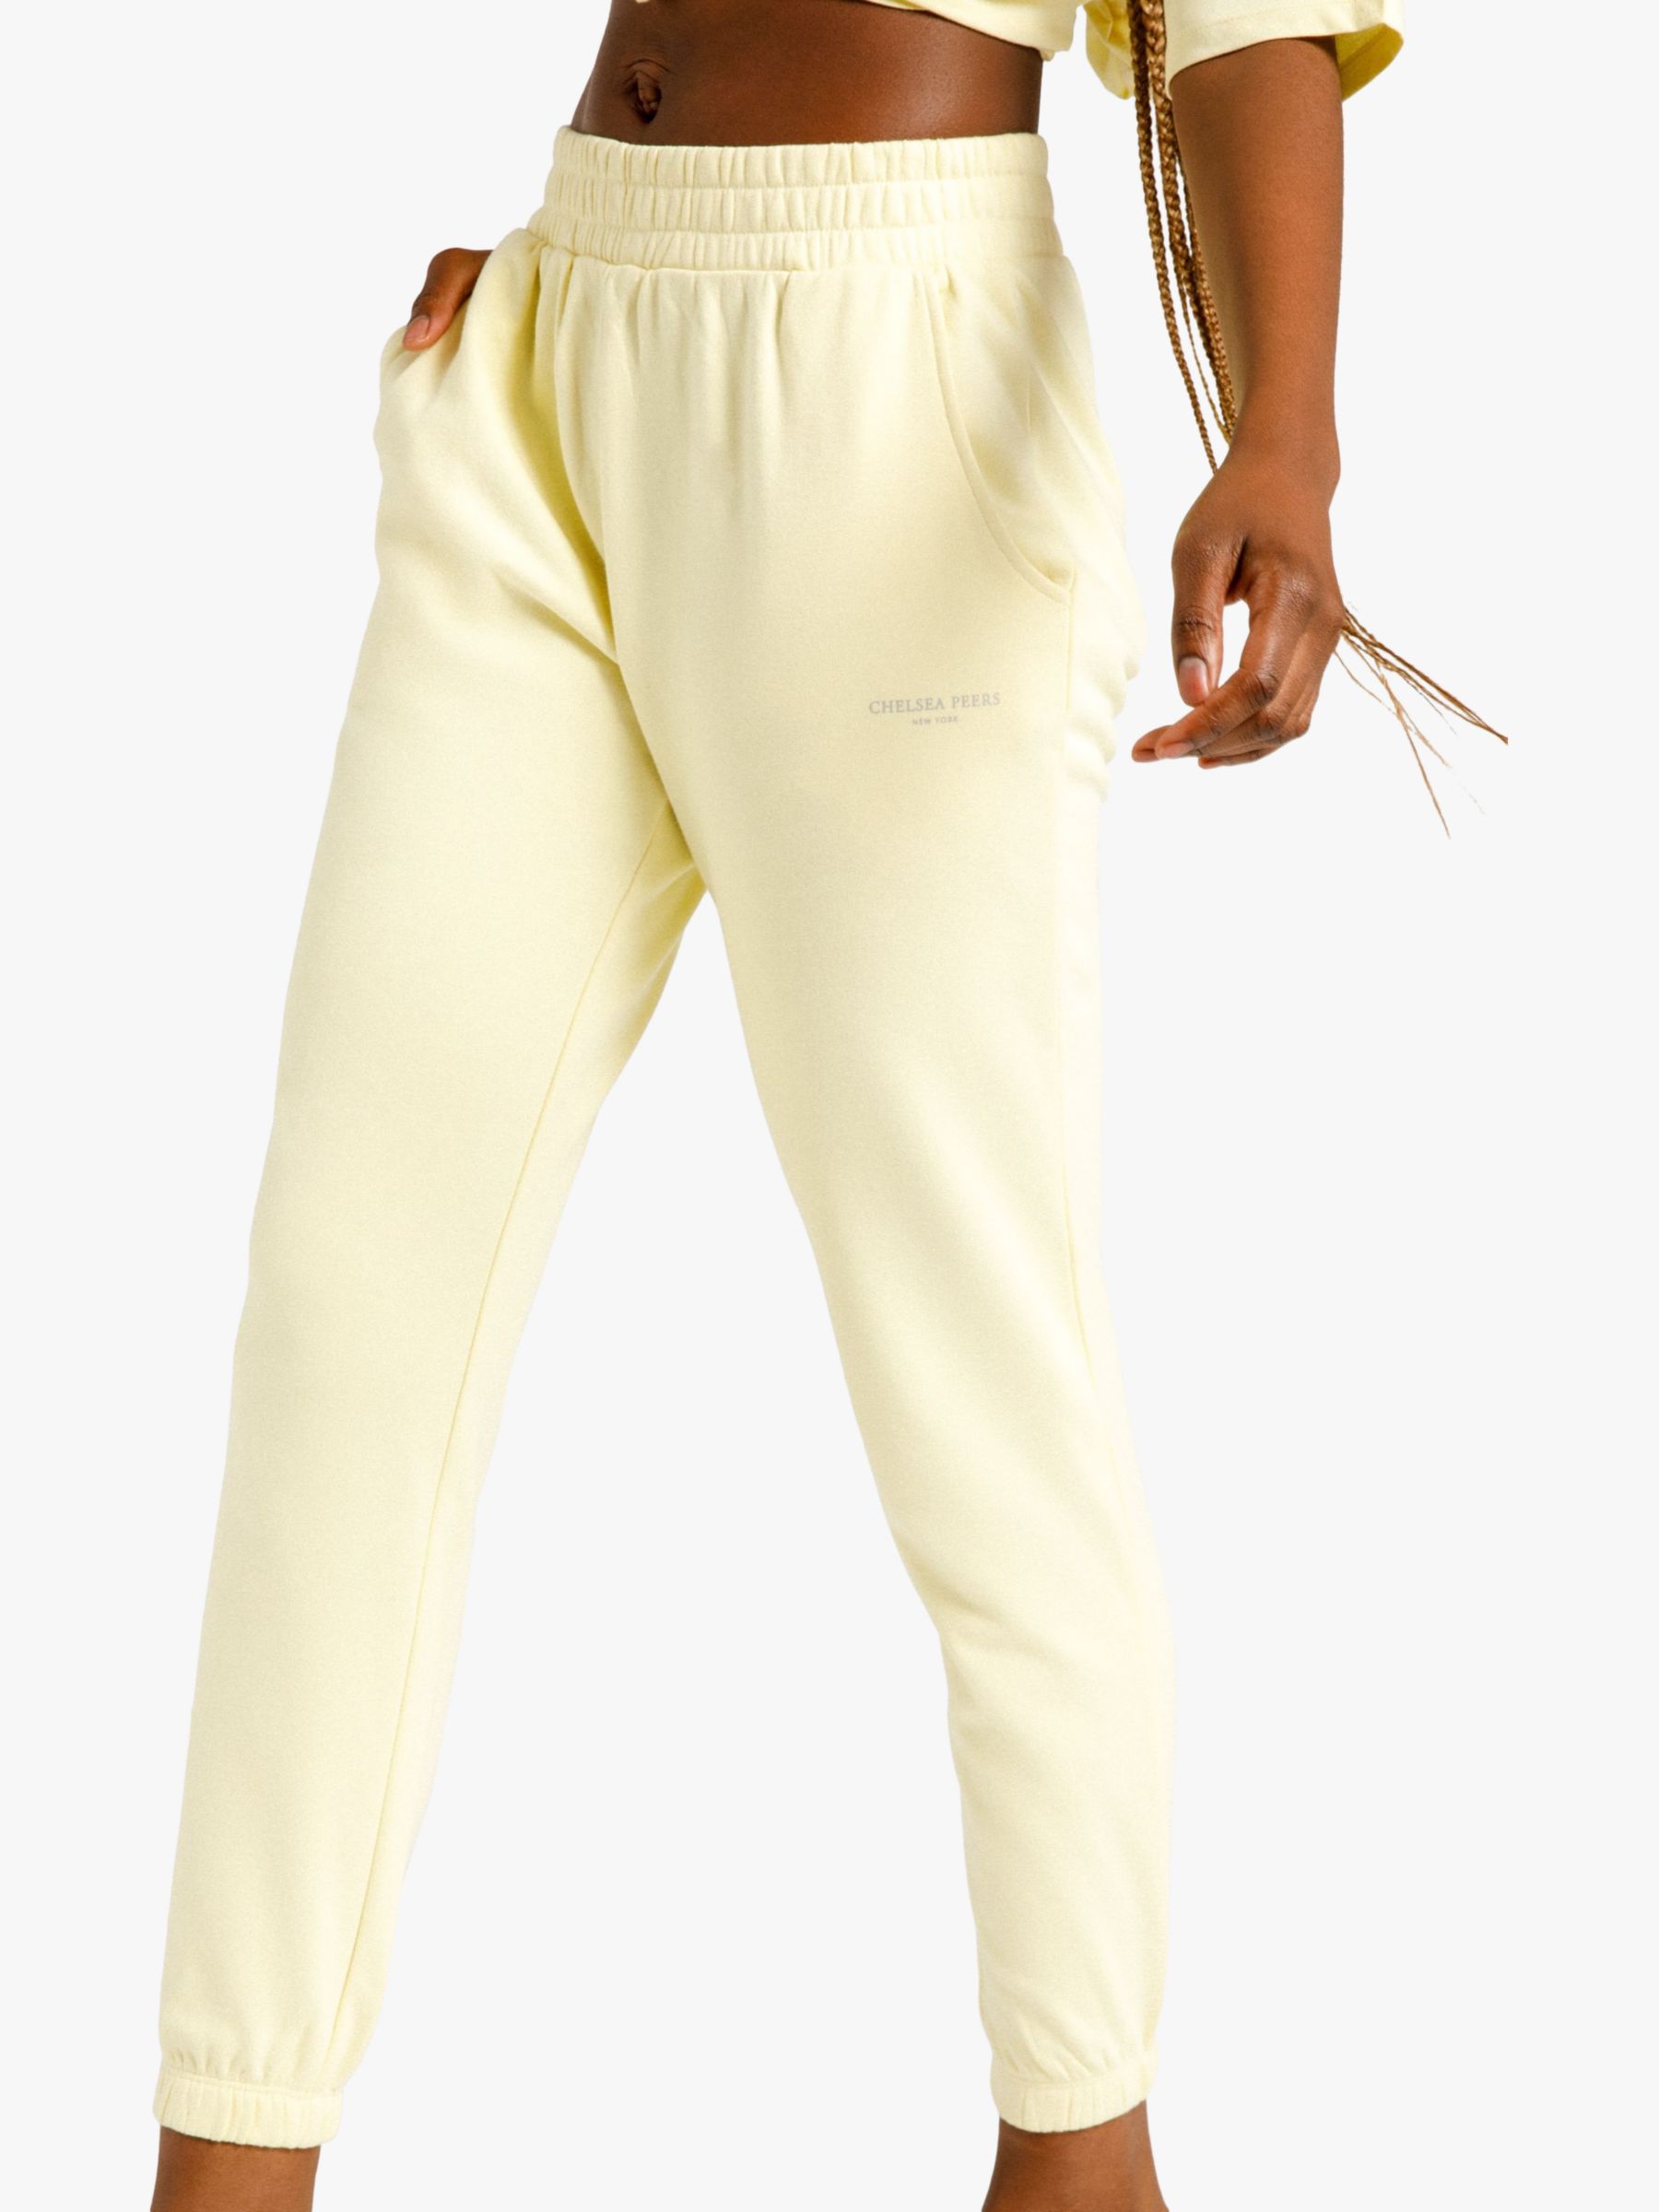 Chelsea Peers Organic Cotton Blend Tapered Cuff Lounge Joggers, Lemon at  John Lewis & Partners